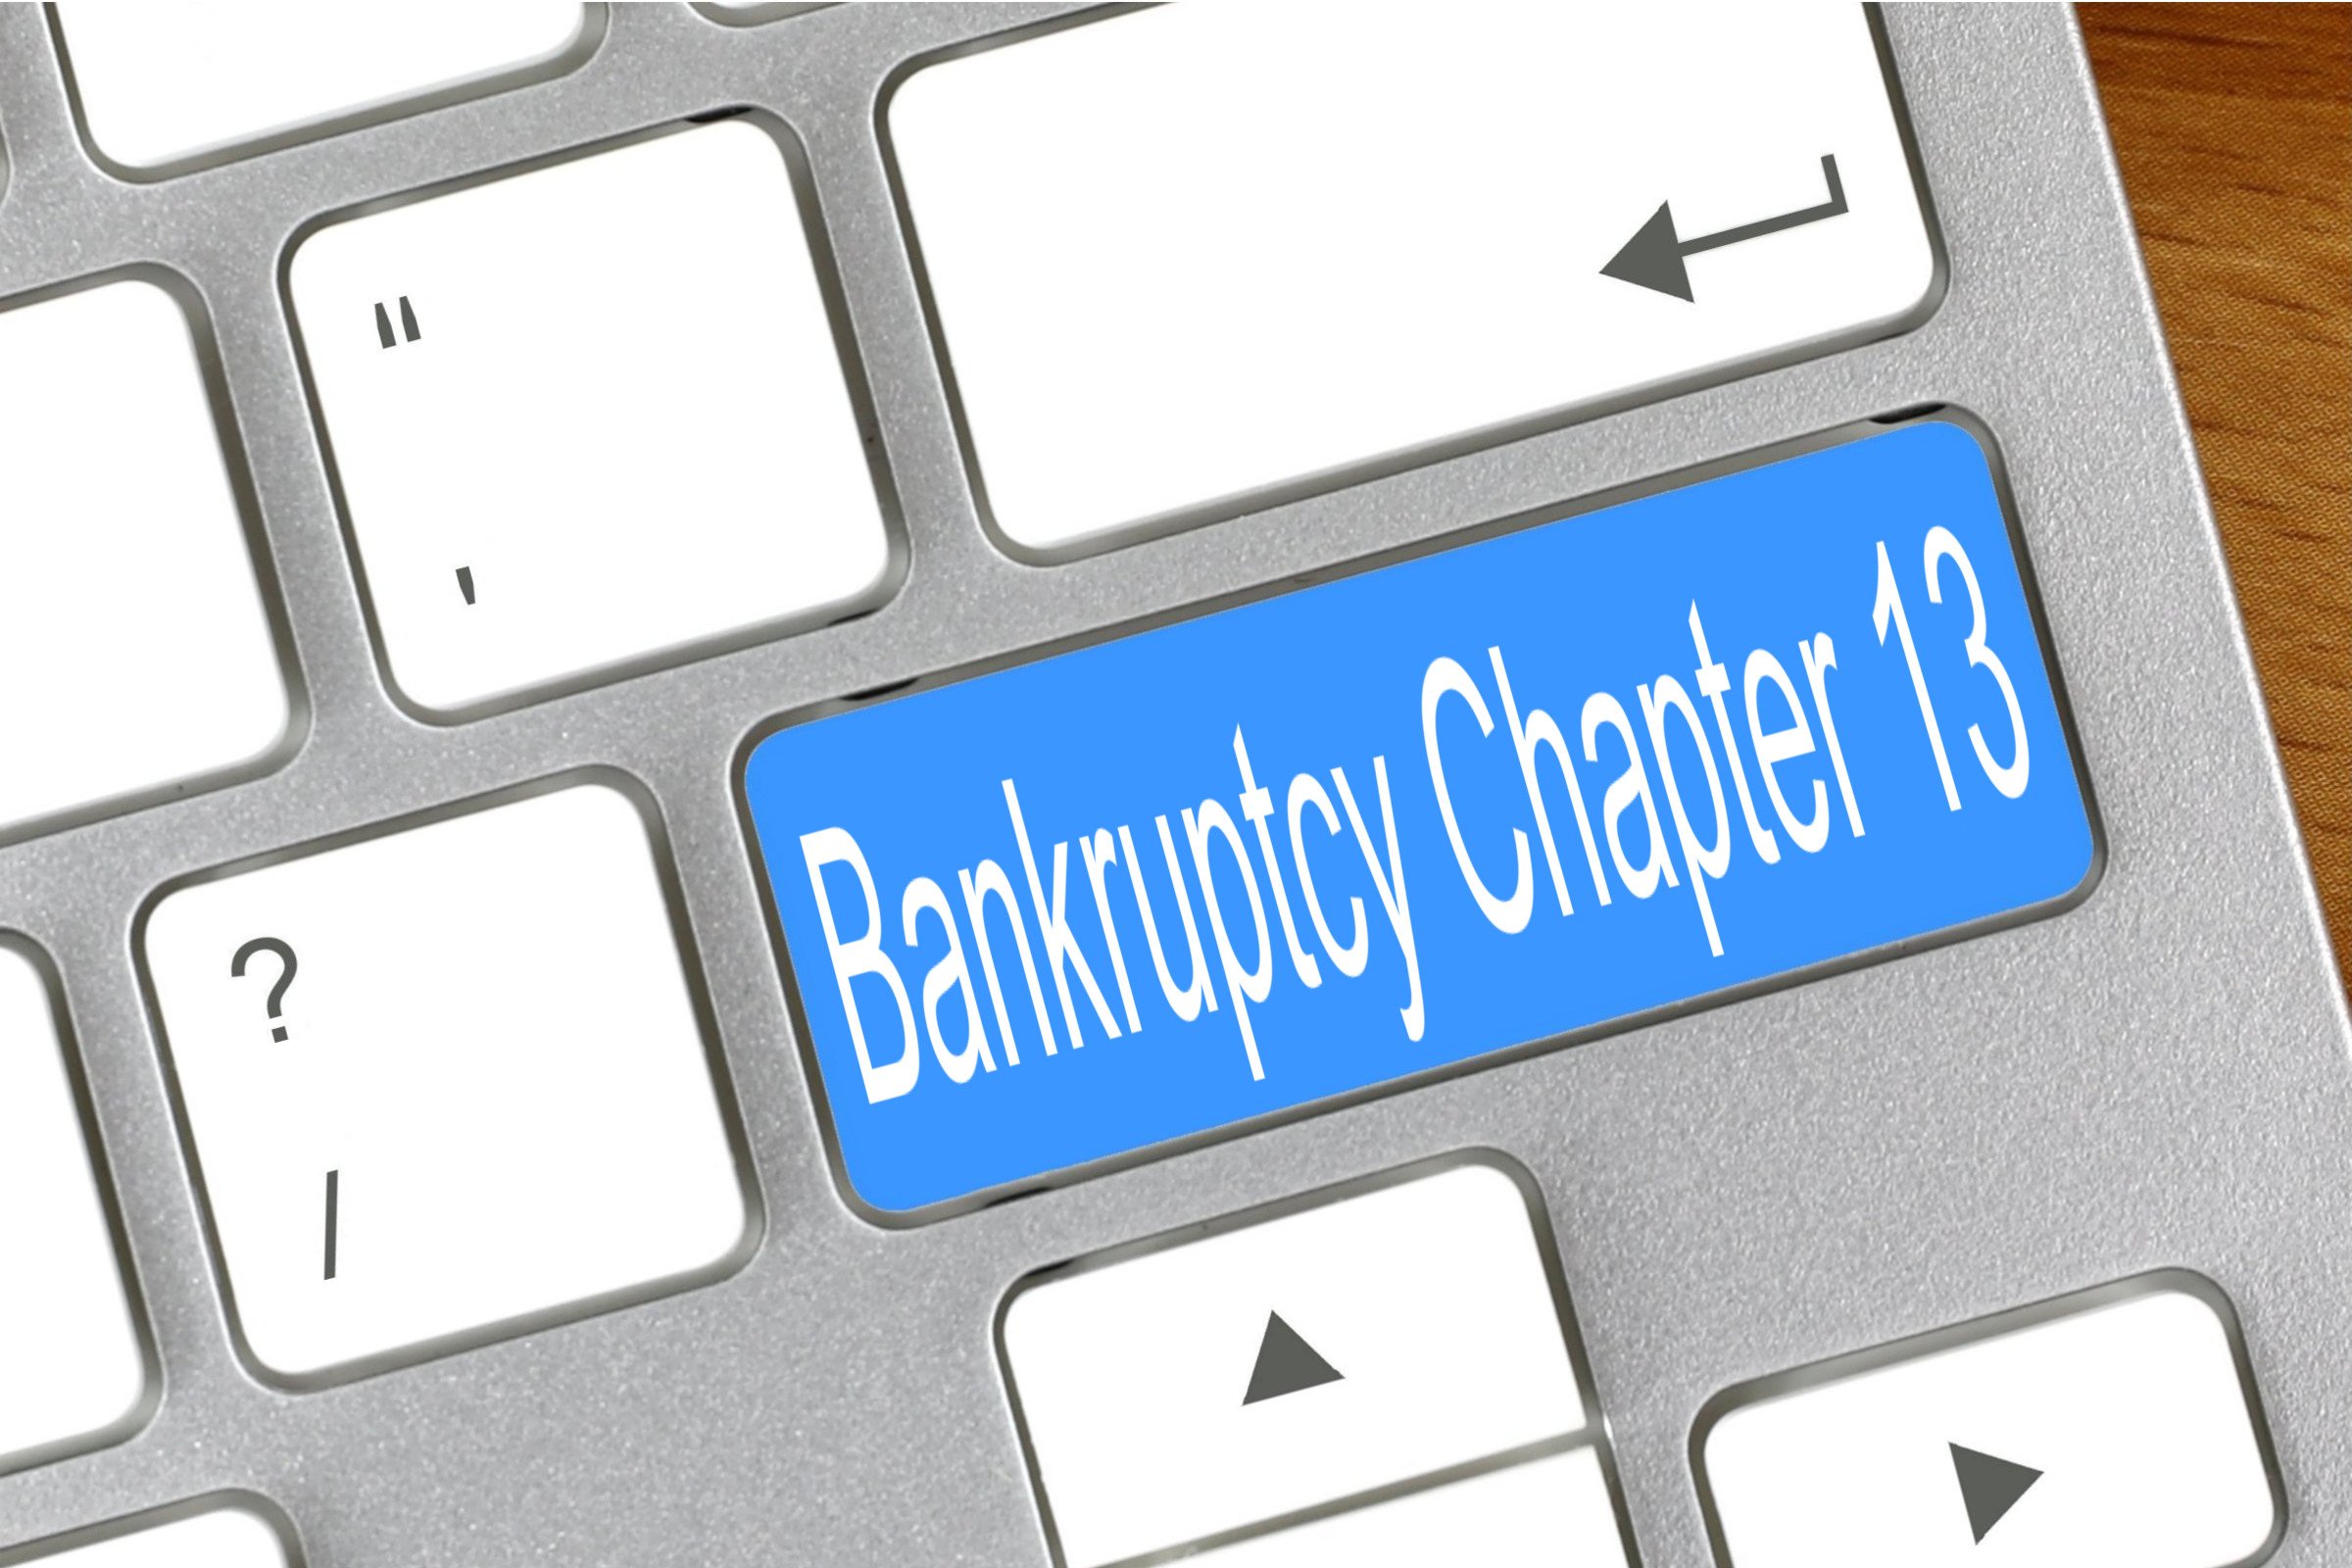 bankruptcy chapter 13